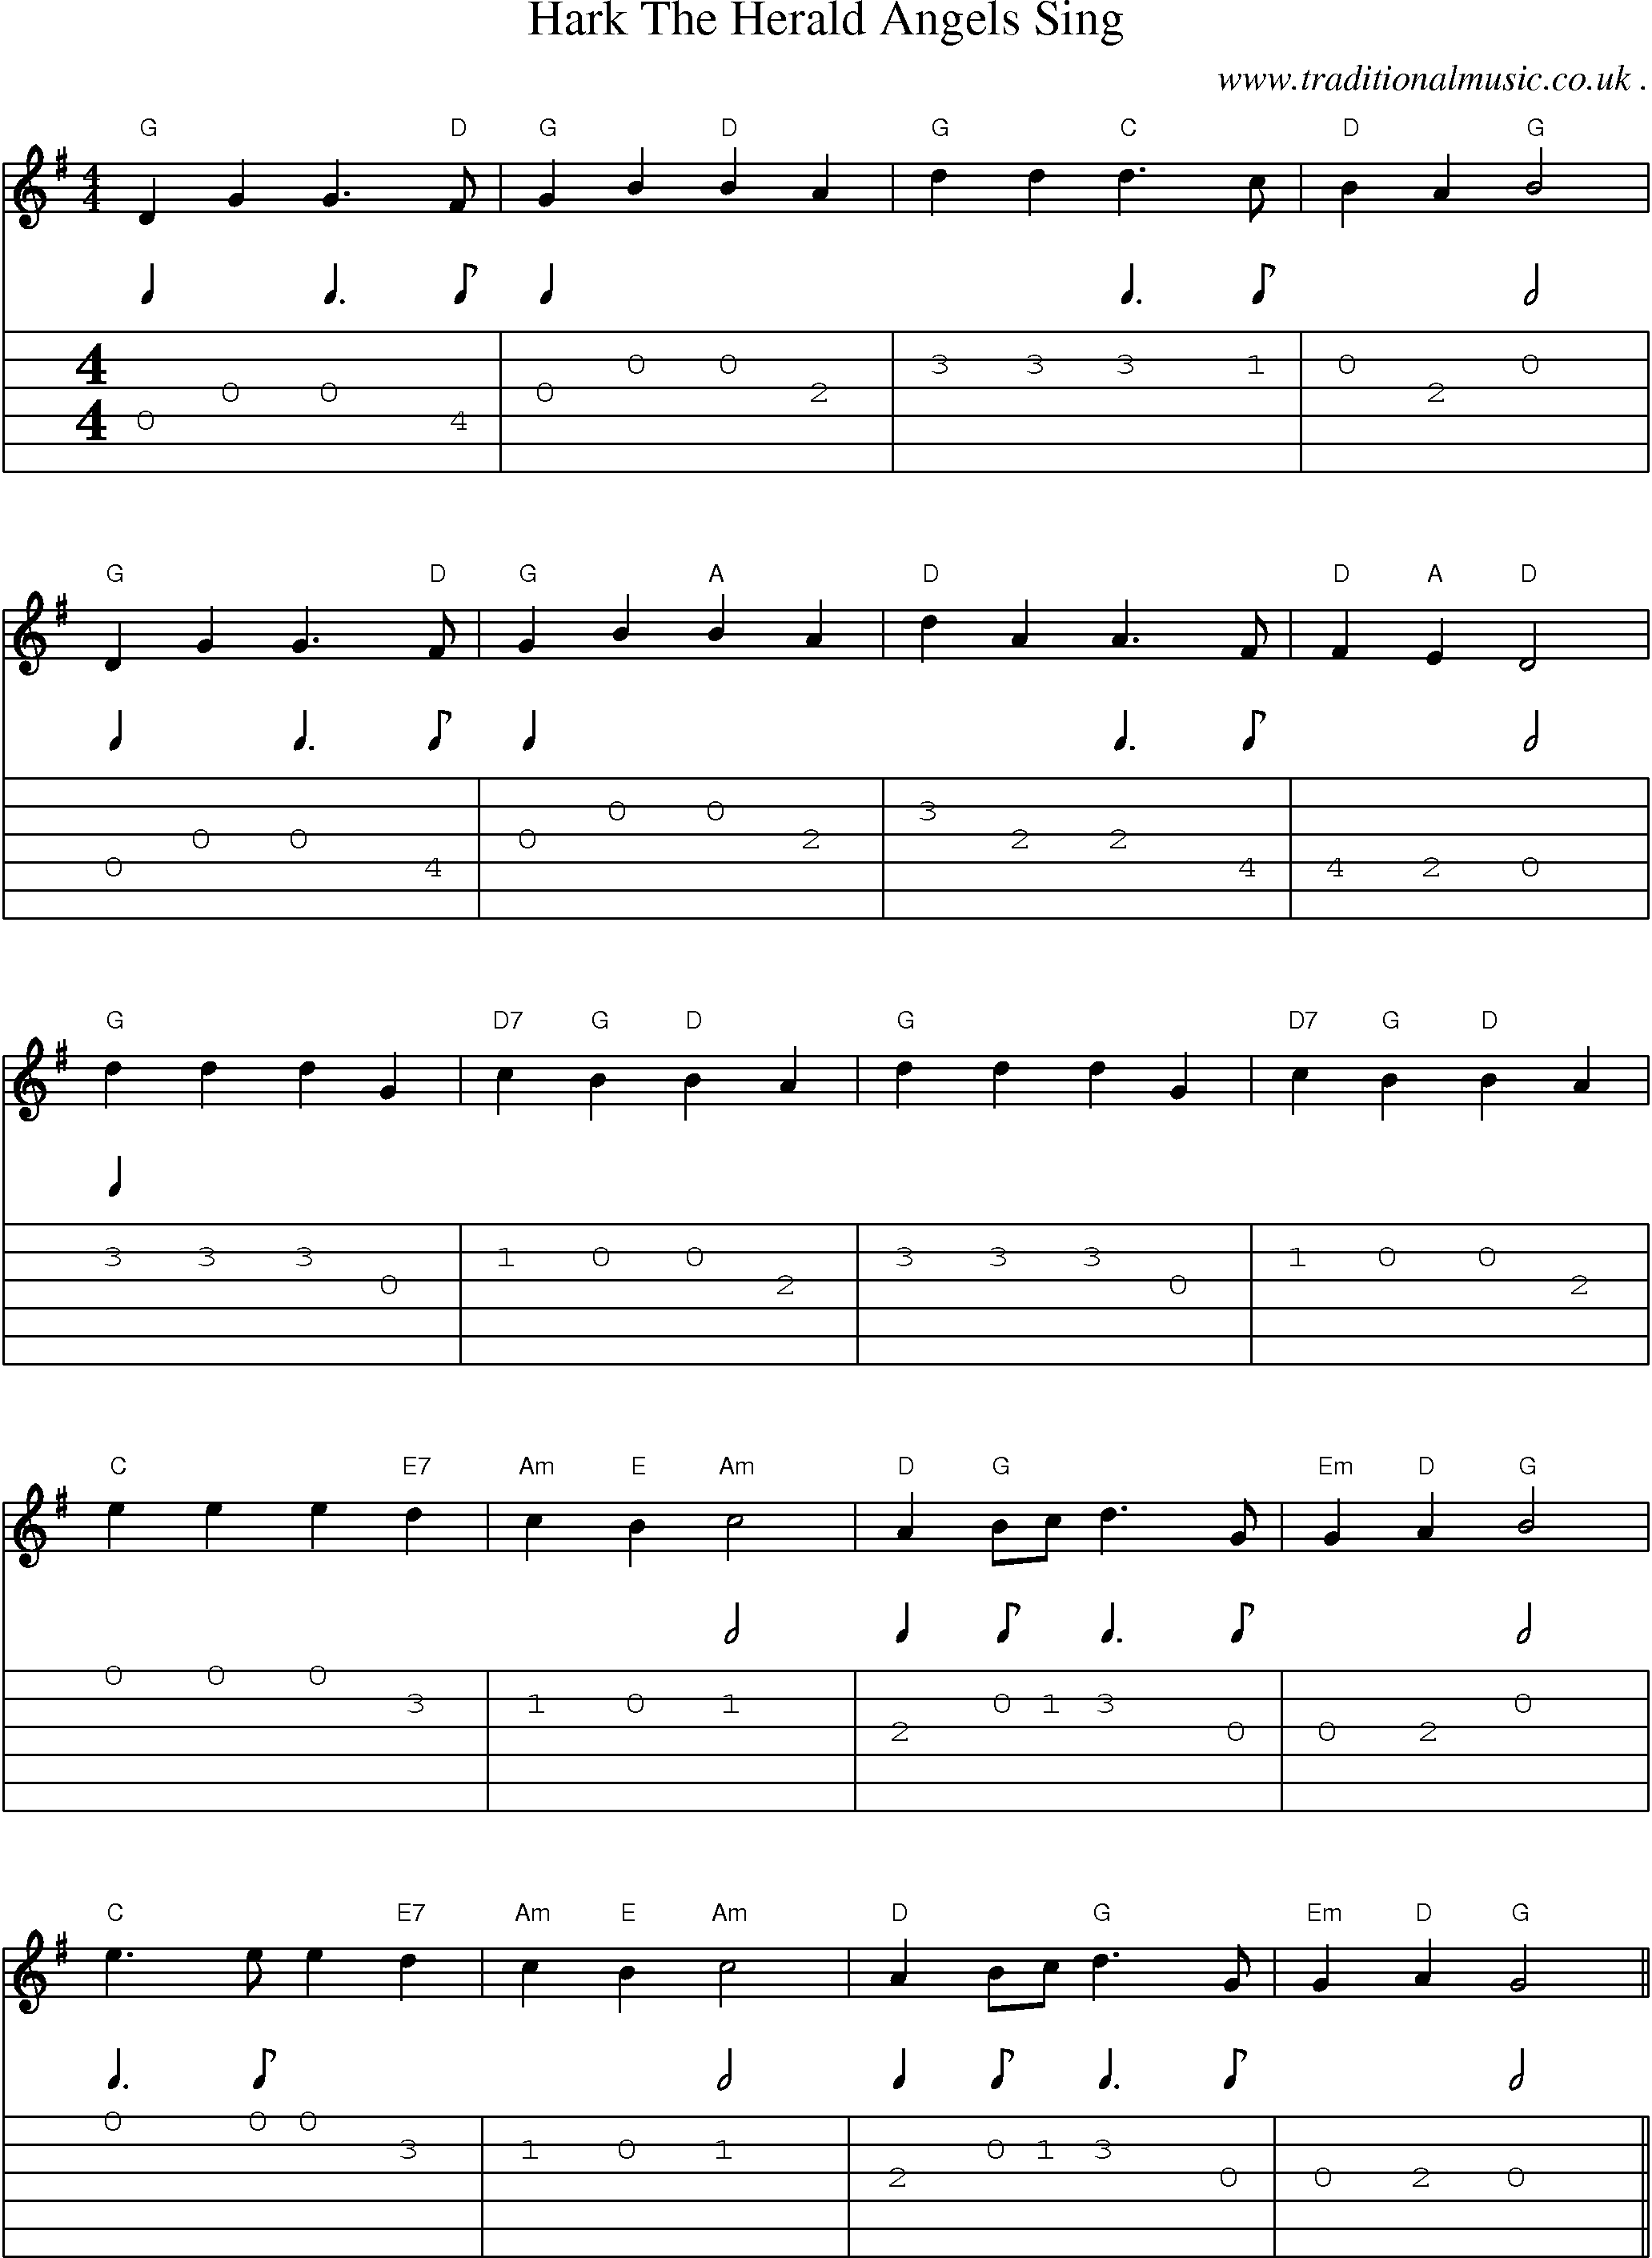 Music Score and Guitar Tabs for Hark The Herald Angels Sing